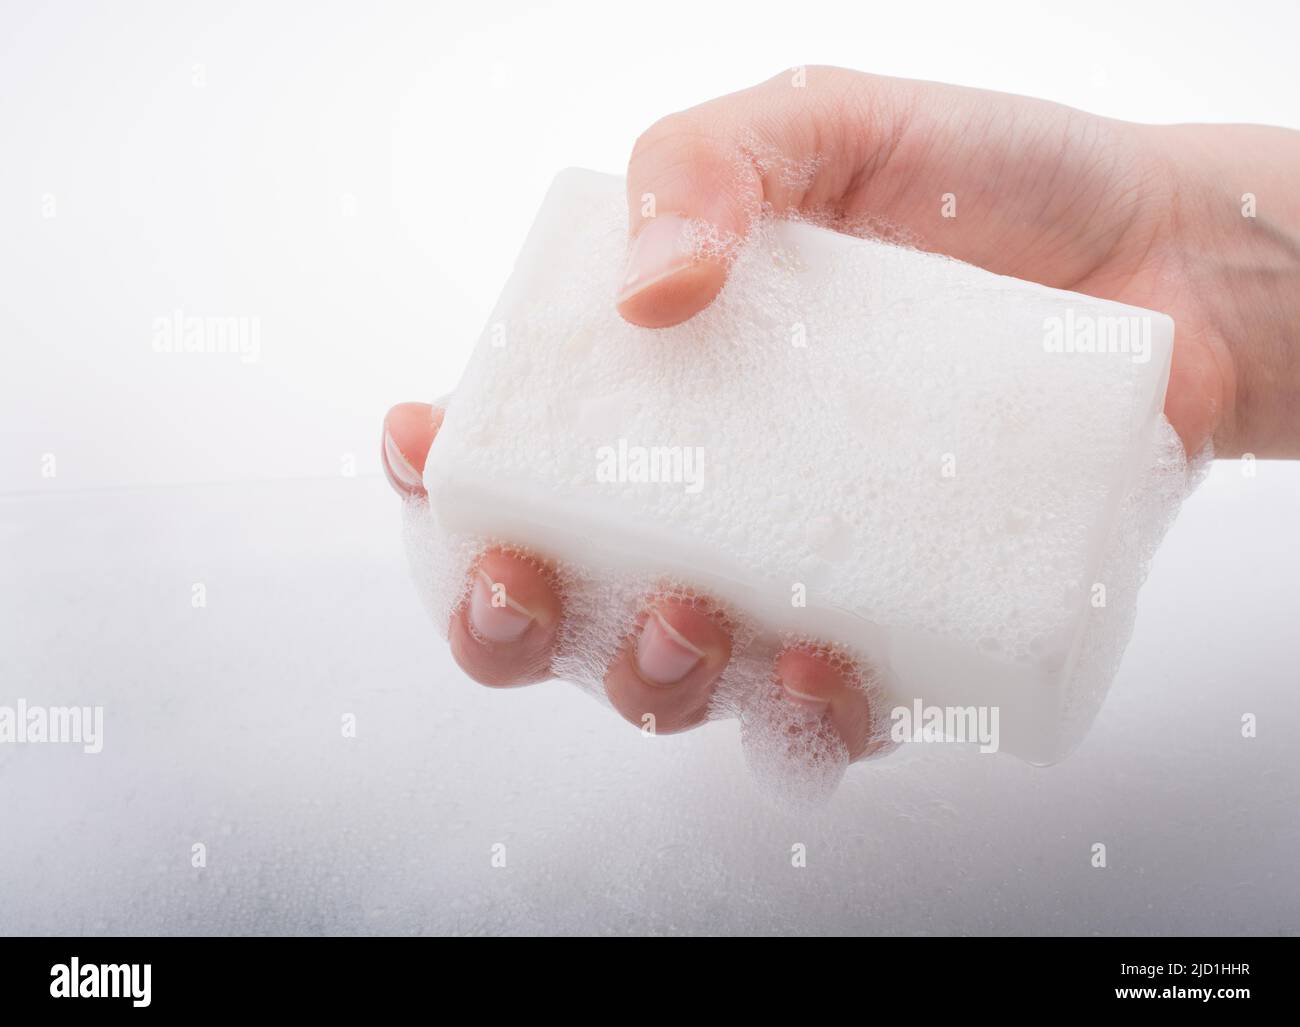 Hand washing and soap foam on a foamy background Stock Photo